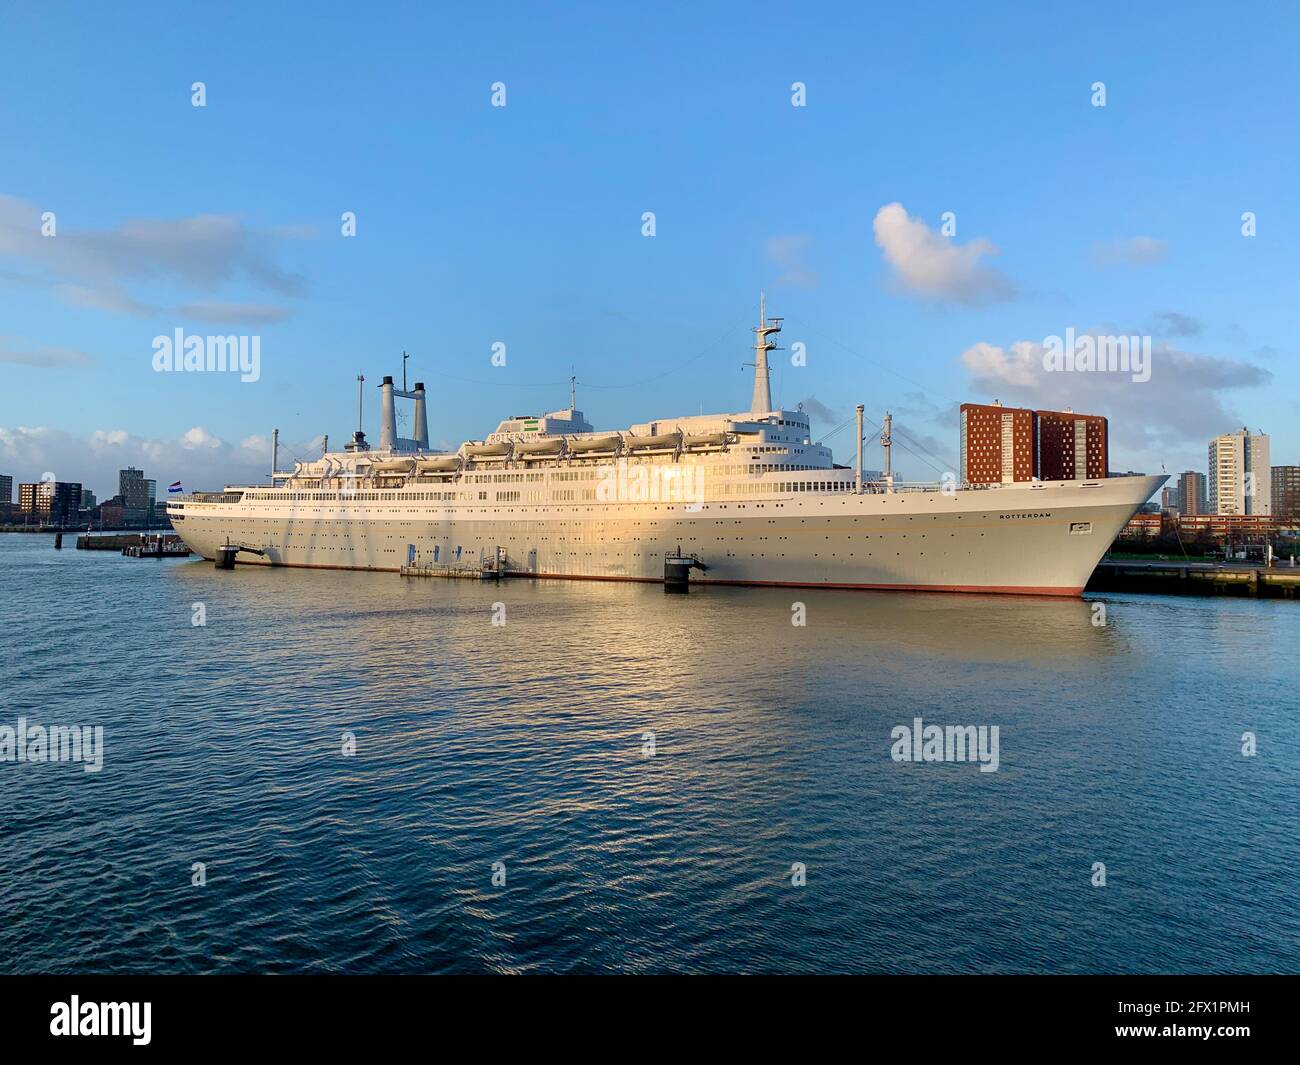 SSRotterdam, former flagship of the Holland-America Line, is now used as a hotel. Rotterdam, The Netherlands, captured on a sunny day in January 2020 Stock Photo